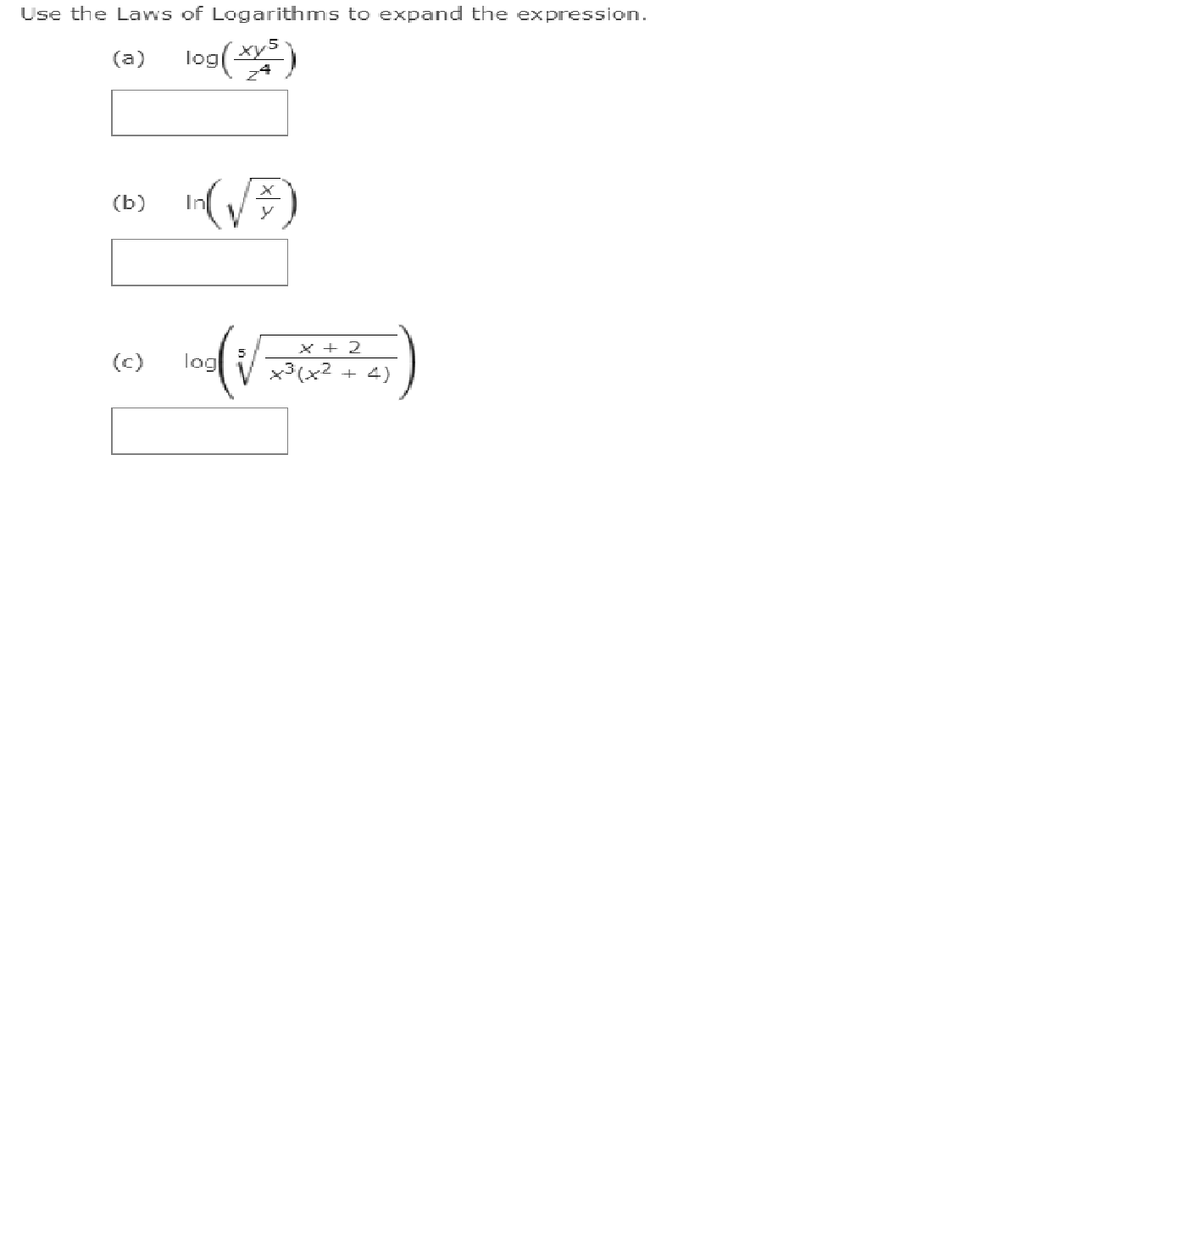 Use the Laws of Logarithms to expand the expression.
(a) log()
(b)
In
X + 2
(c)
log
+ 4)
